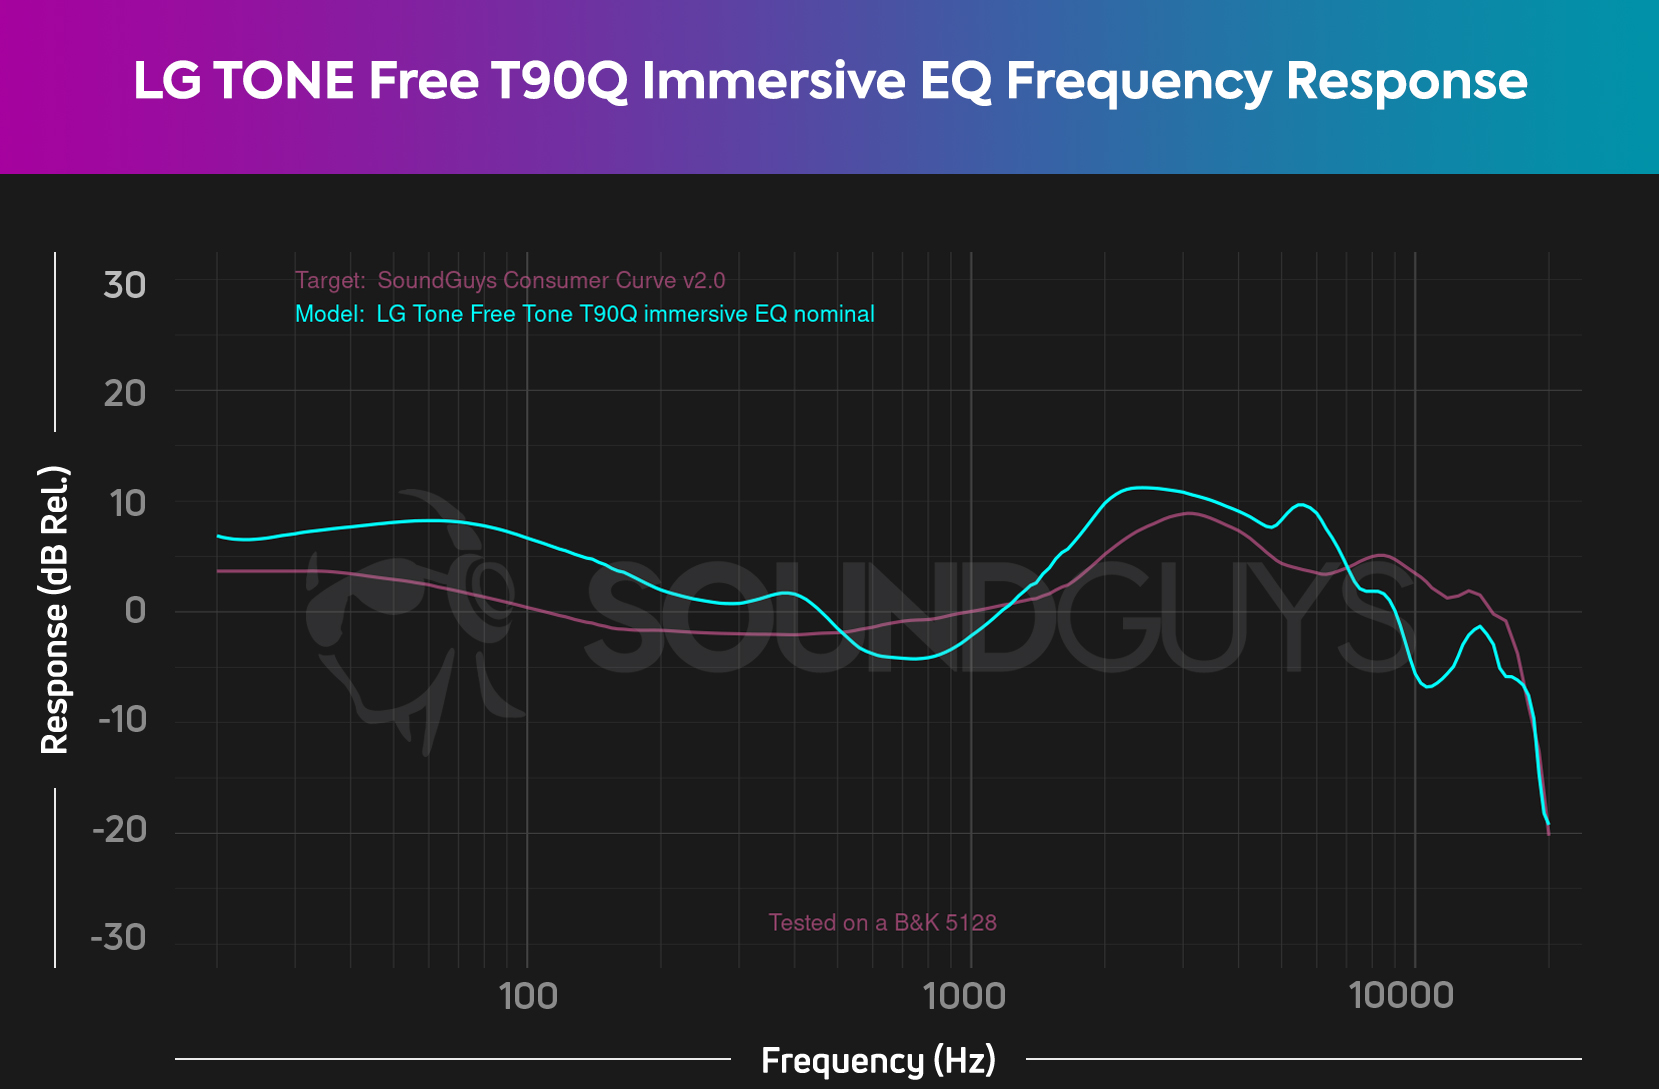 The frequency response chart for the LG TONE Free T90Q showing the immersive EQ.